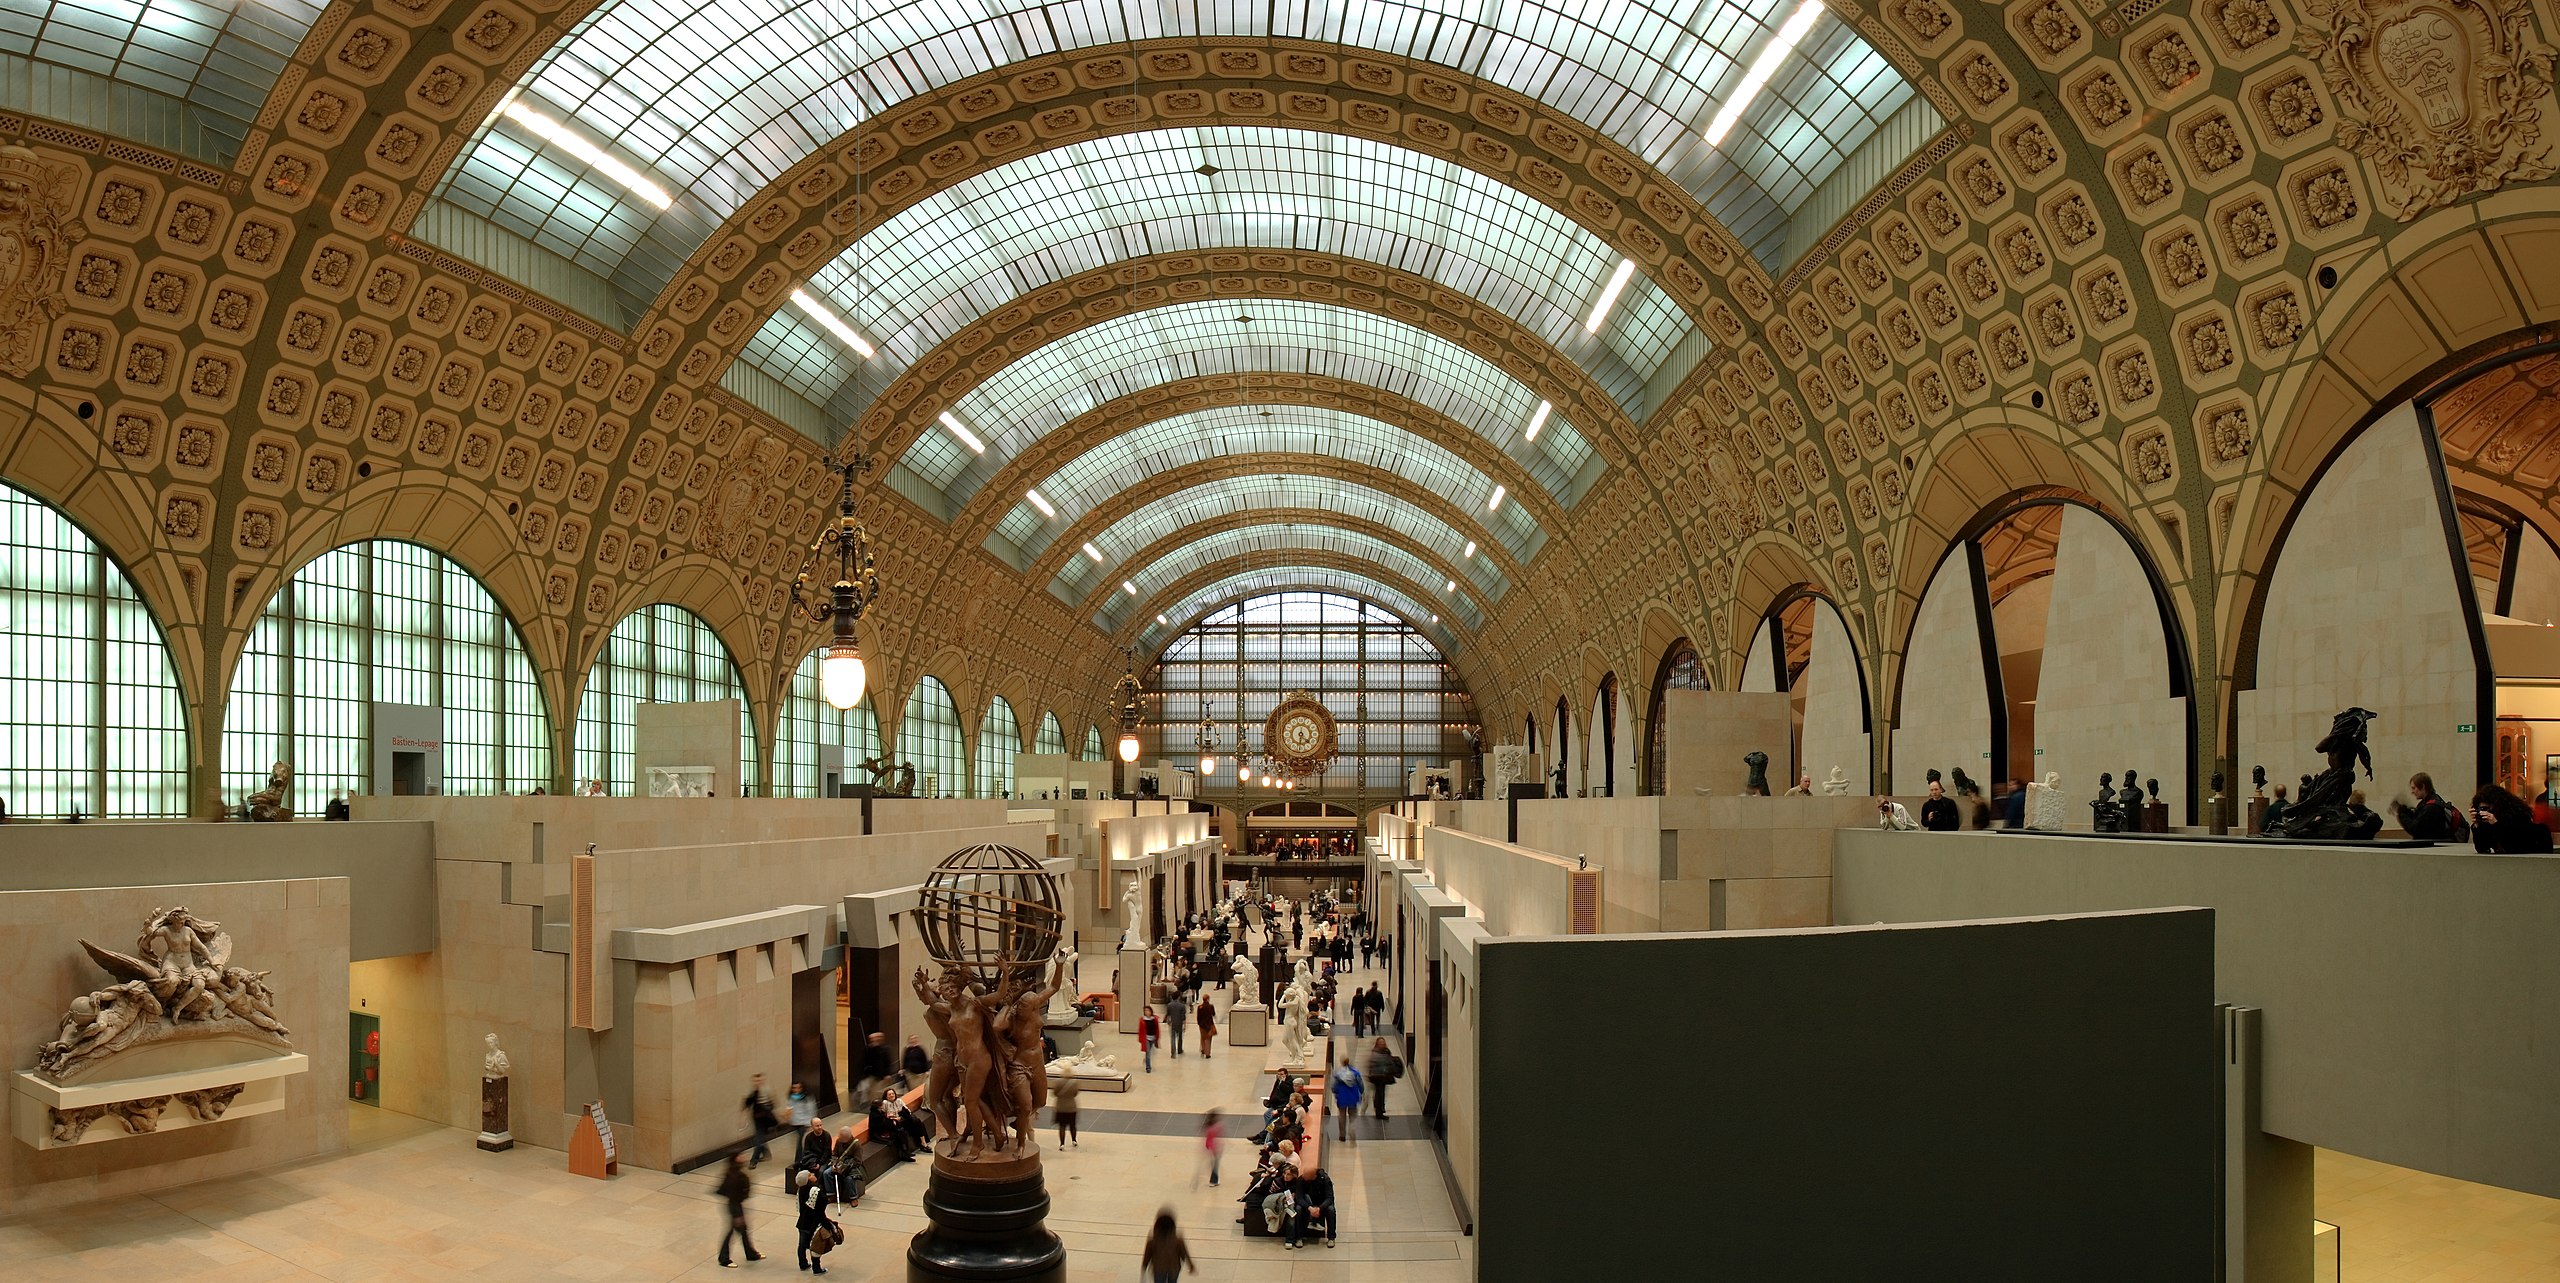 One gallery of the Musee d'Orsay that now exists as a virtual art exhibition